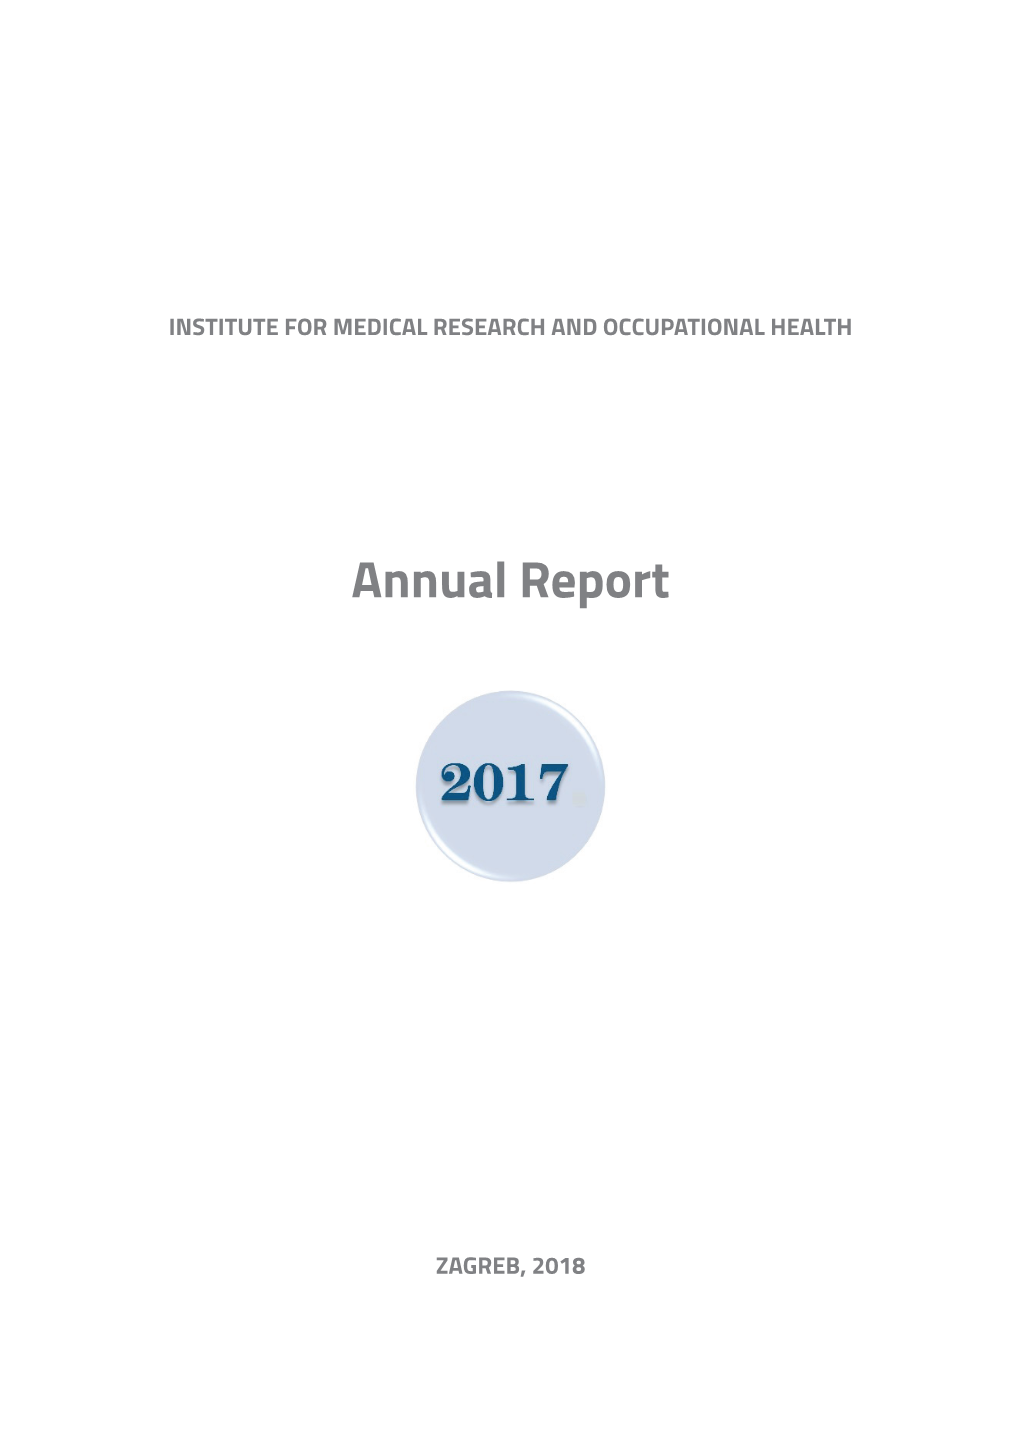 Annual Report for 2017